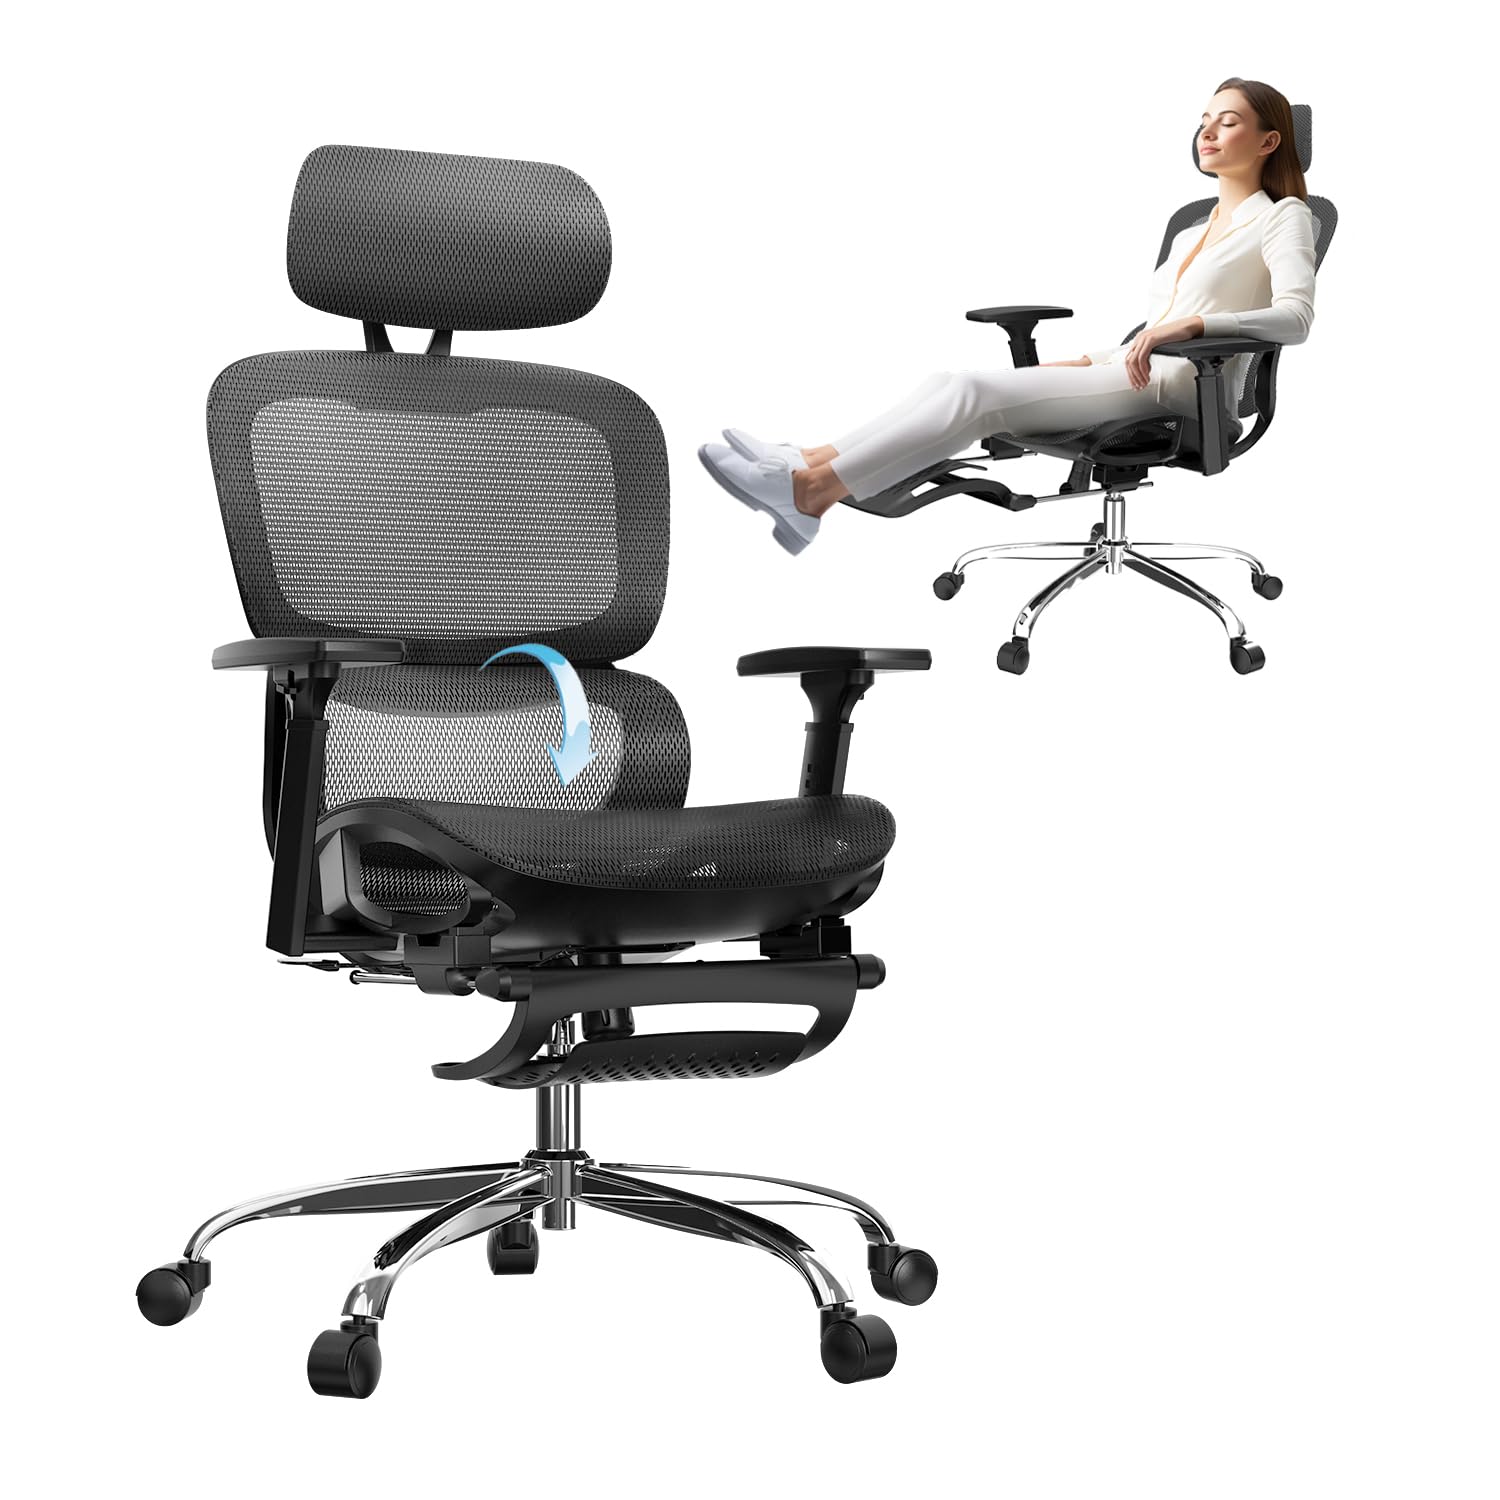 Find Your Perfect Chair: Top Chairs for Long Work Hours